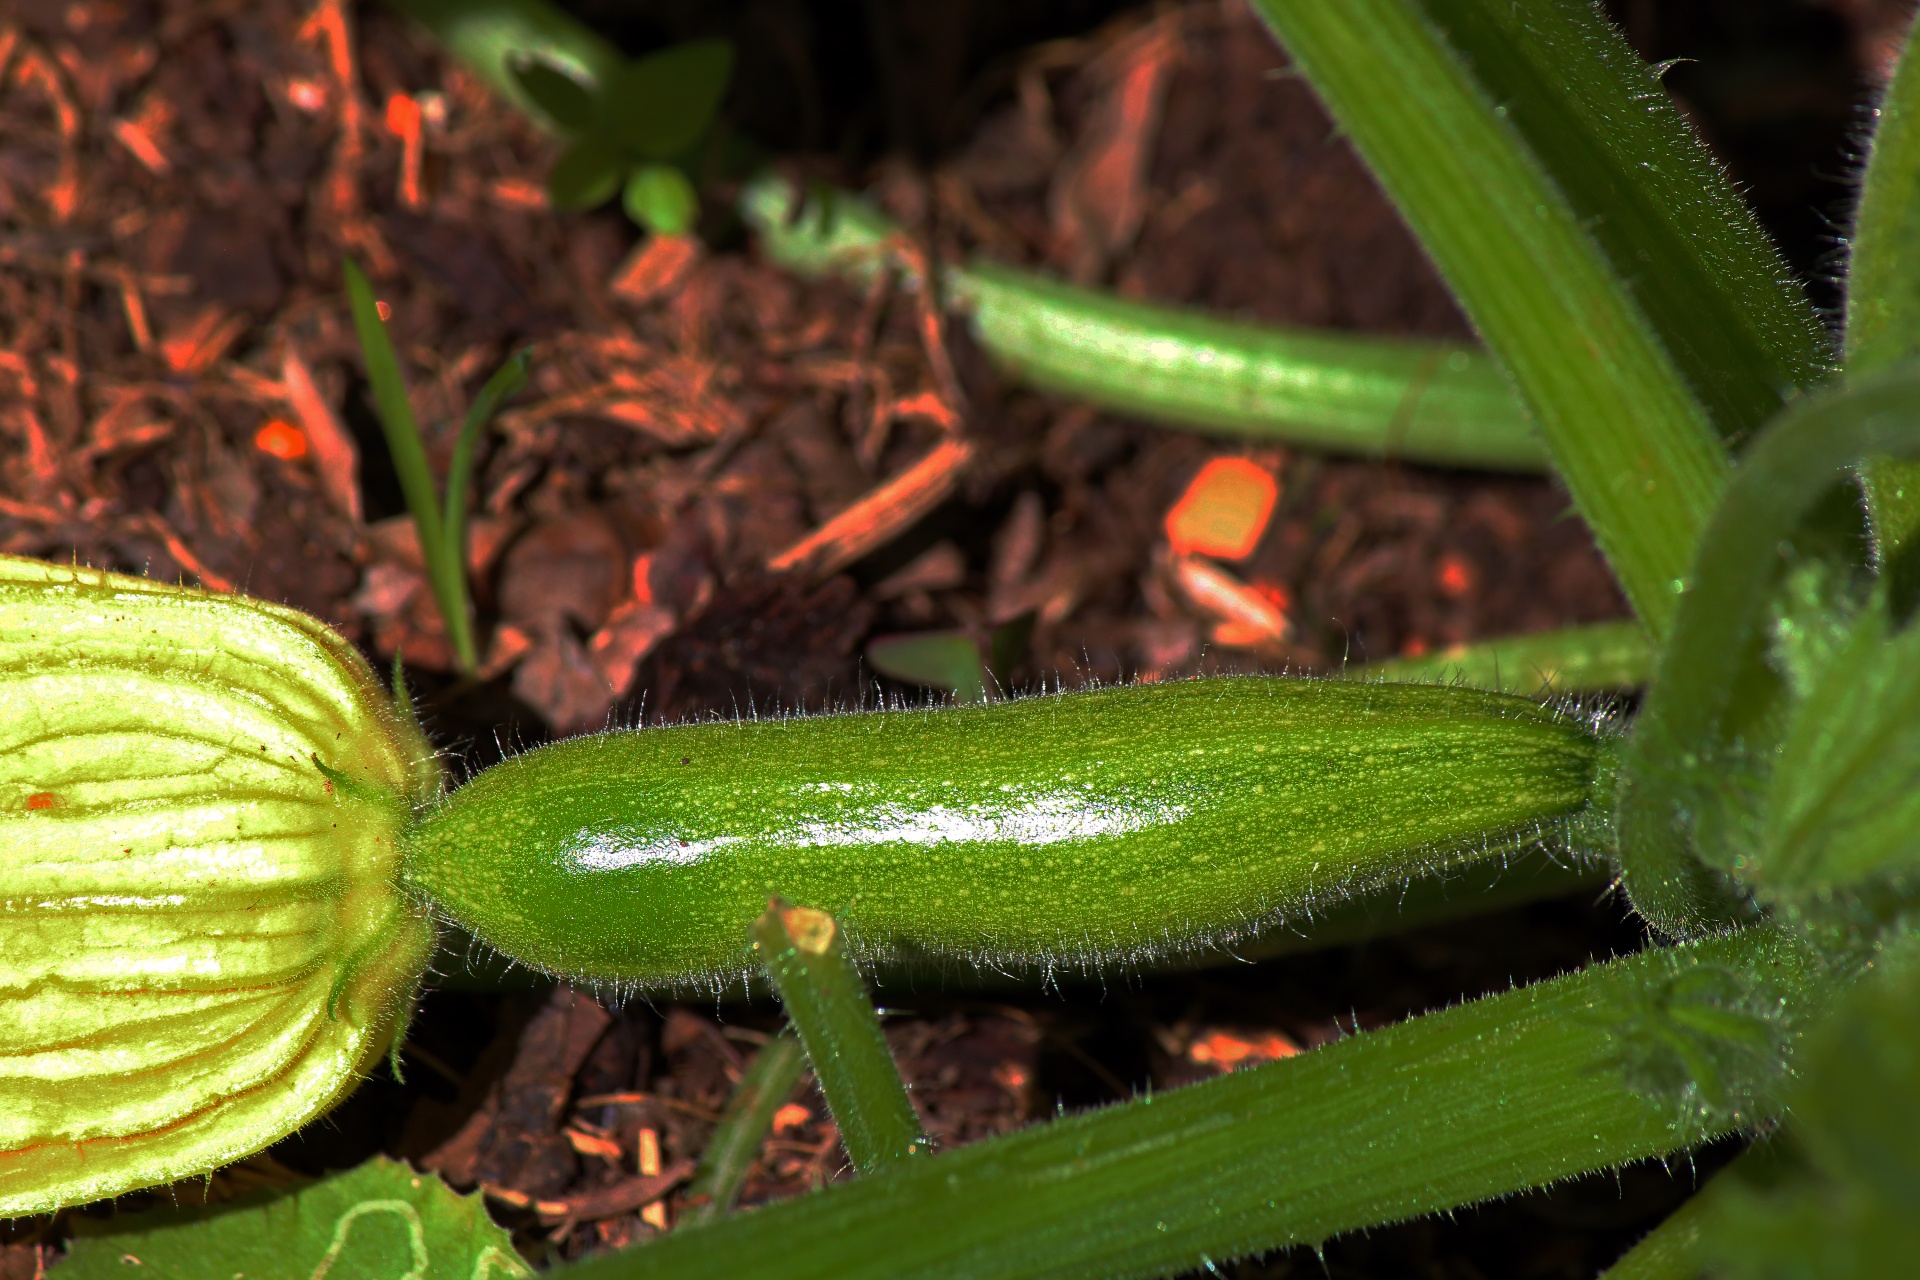 View Of Tiny Squash Forming